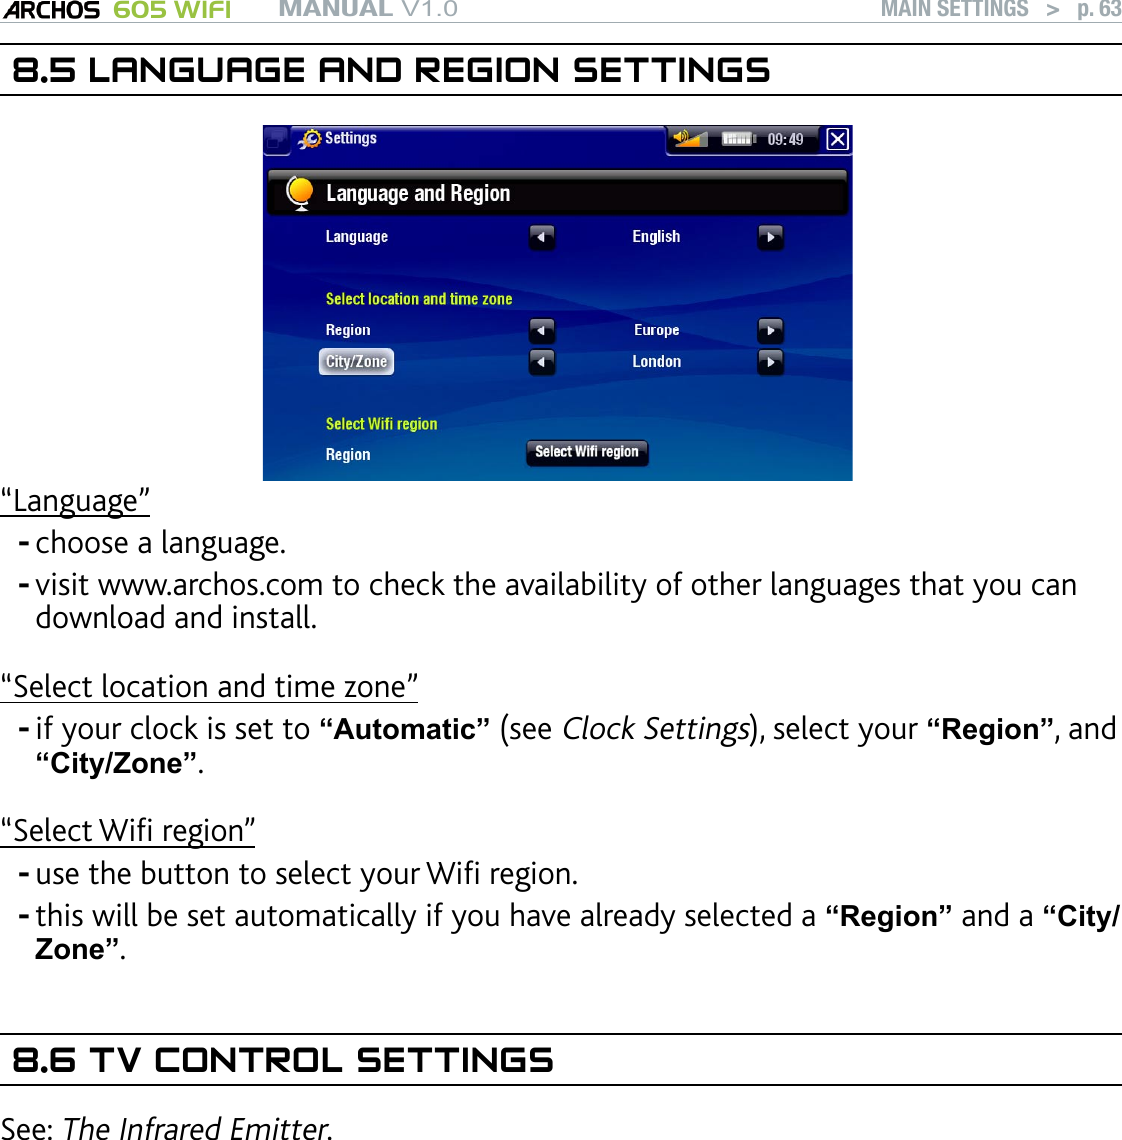 MANUAL V1.0 605 WIFI MAIN SETTINGS   &gt;   p. 638.5 LANGUAGE AND REGION SETTINGS“Language”choose a language.visit www.archos.com to check the availability of other languages that you can download and install.“Select location and time zone”if your clock is set to “Automatic” (see Clock Settings), select your “Region”, and “City/Zone”.“Select Wi region”use the button to select your Wi region. this will be set automatically if you have already selected a “Region” and a “City/Zone”.8.6 TV CONTROL SETTINGSSee: The Infrared Emitter.-----